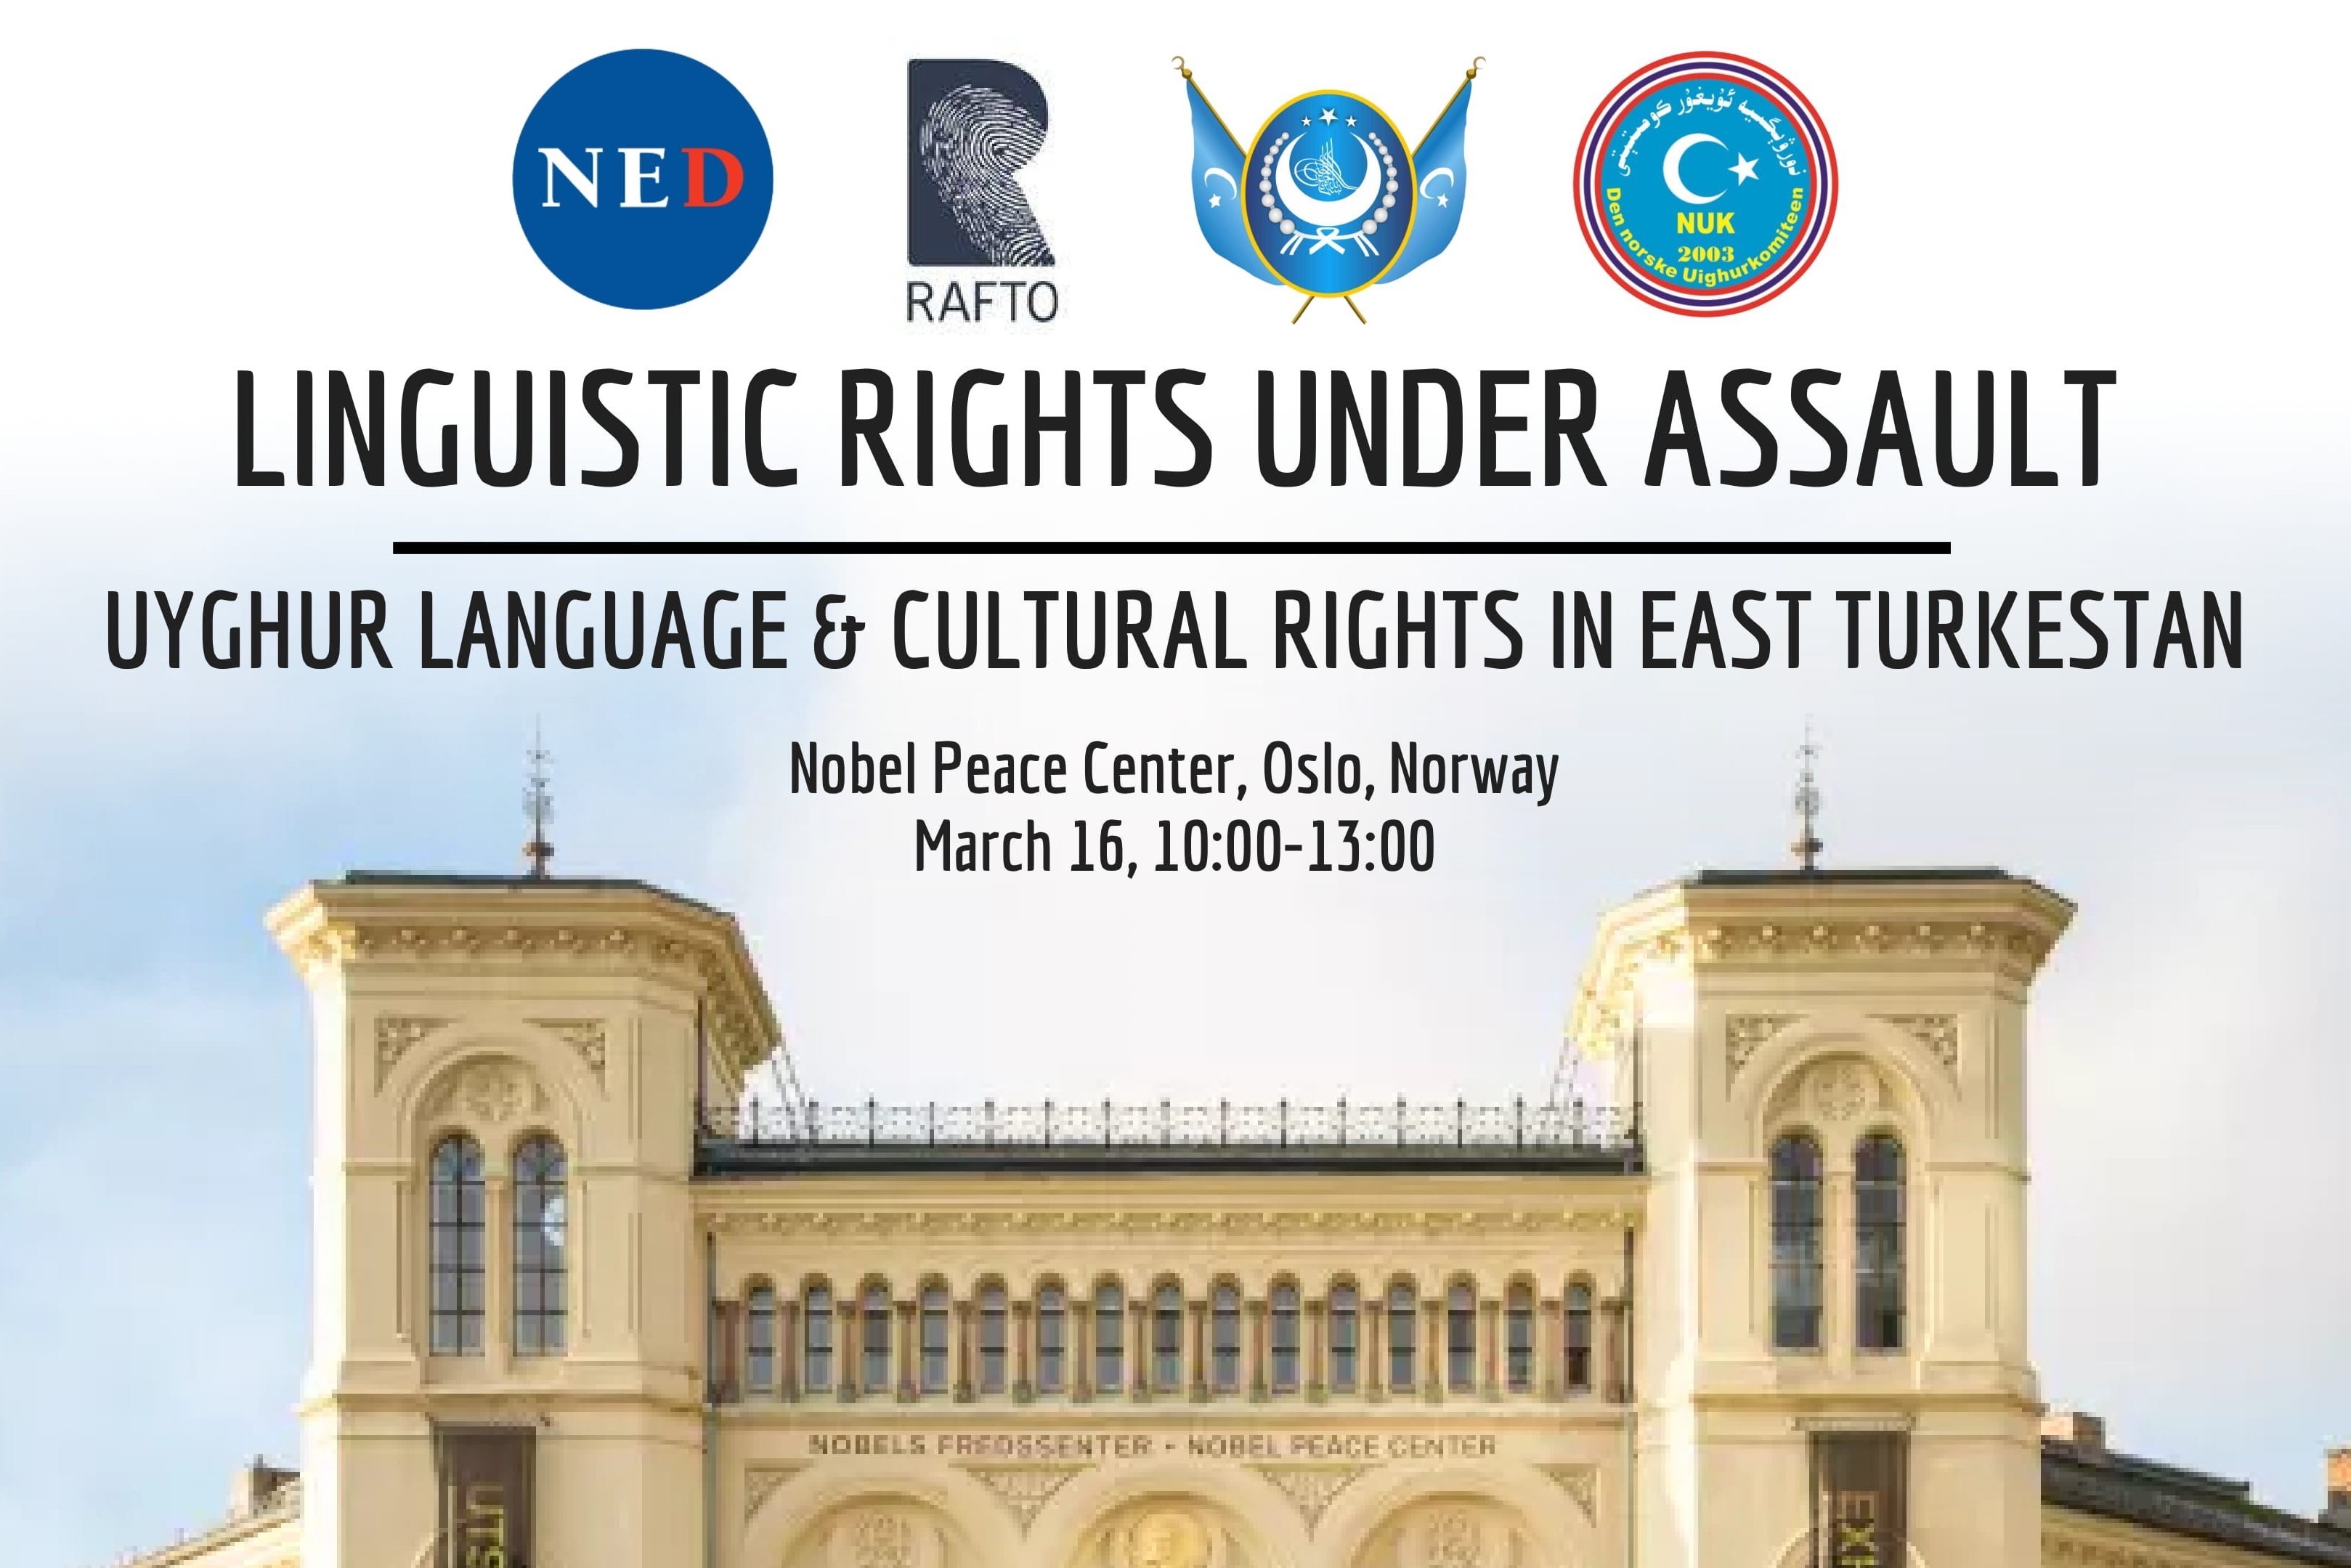 World Uyghur Congress Concludes Round-table Discussion at the Nobel Peace Center in Oslo, Norway